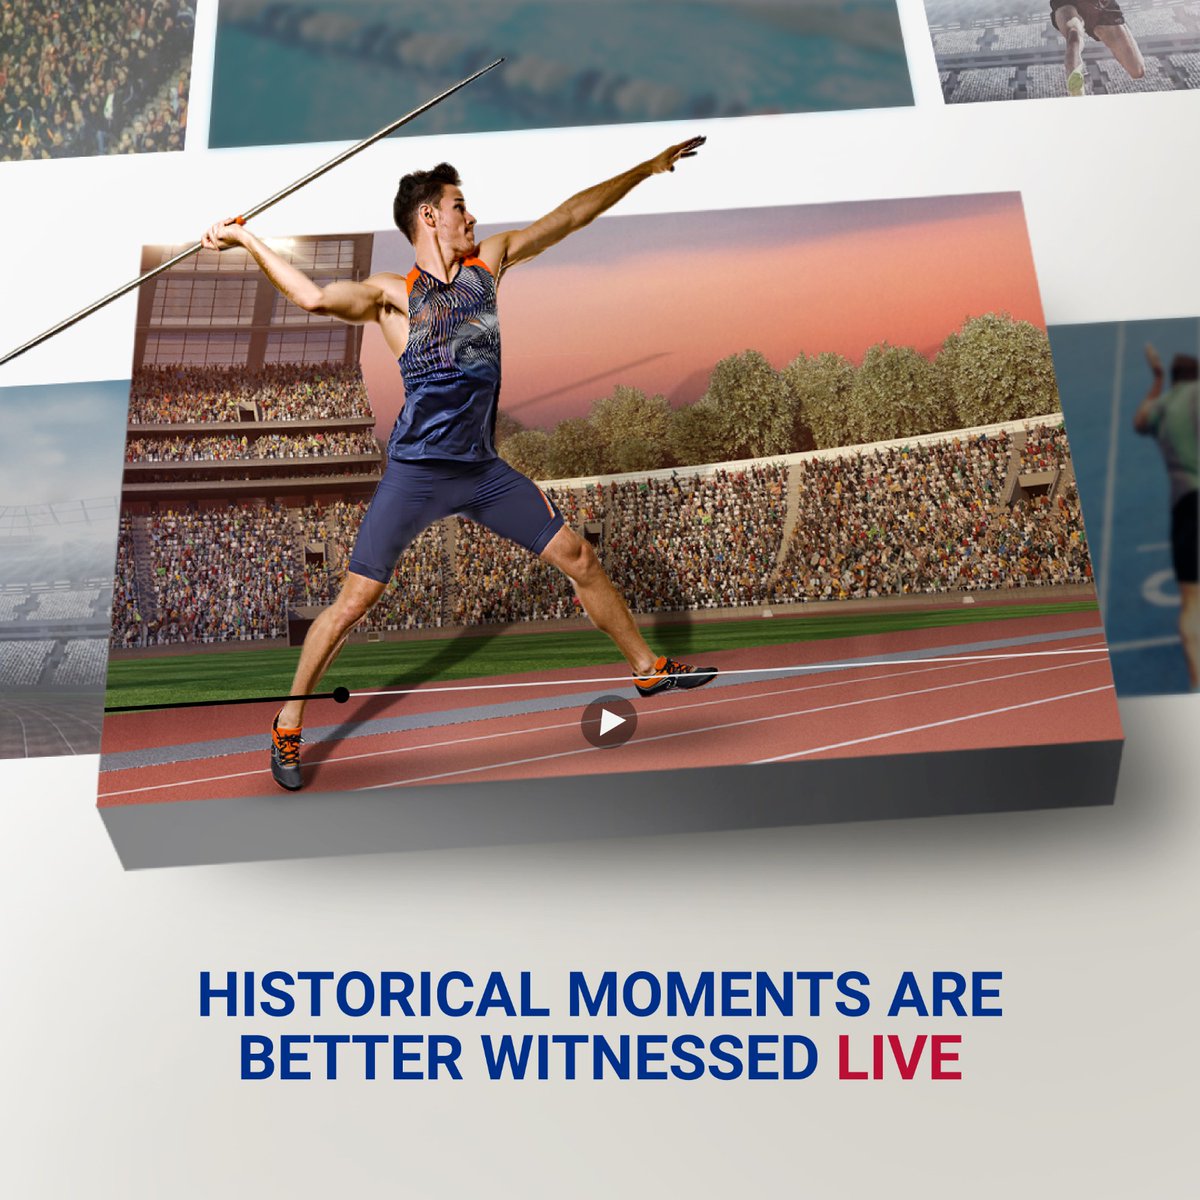 Witness history unfold before your eyes 🤩 and not on a screen 📺

Join us and be part of the electrifying atmosphere as the world's finest athletes compete for glory.

#SummerGames #Paris #SportsHospitality